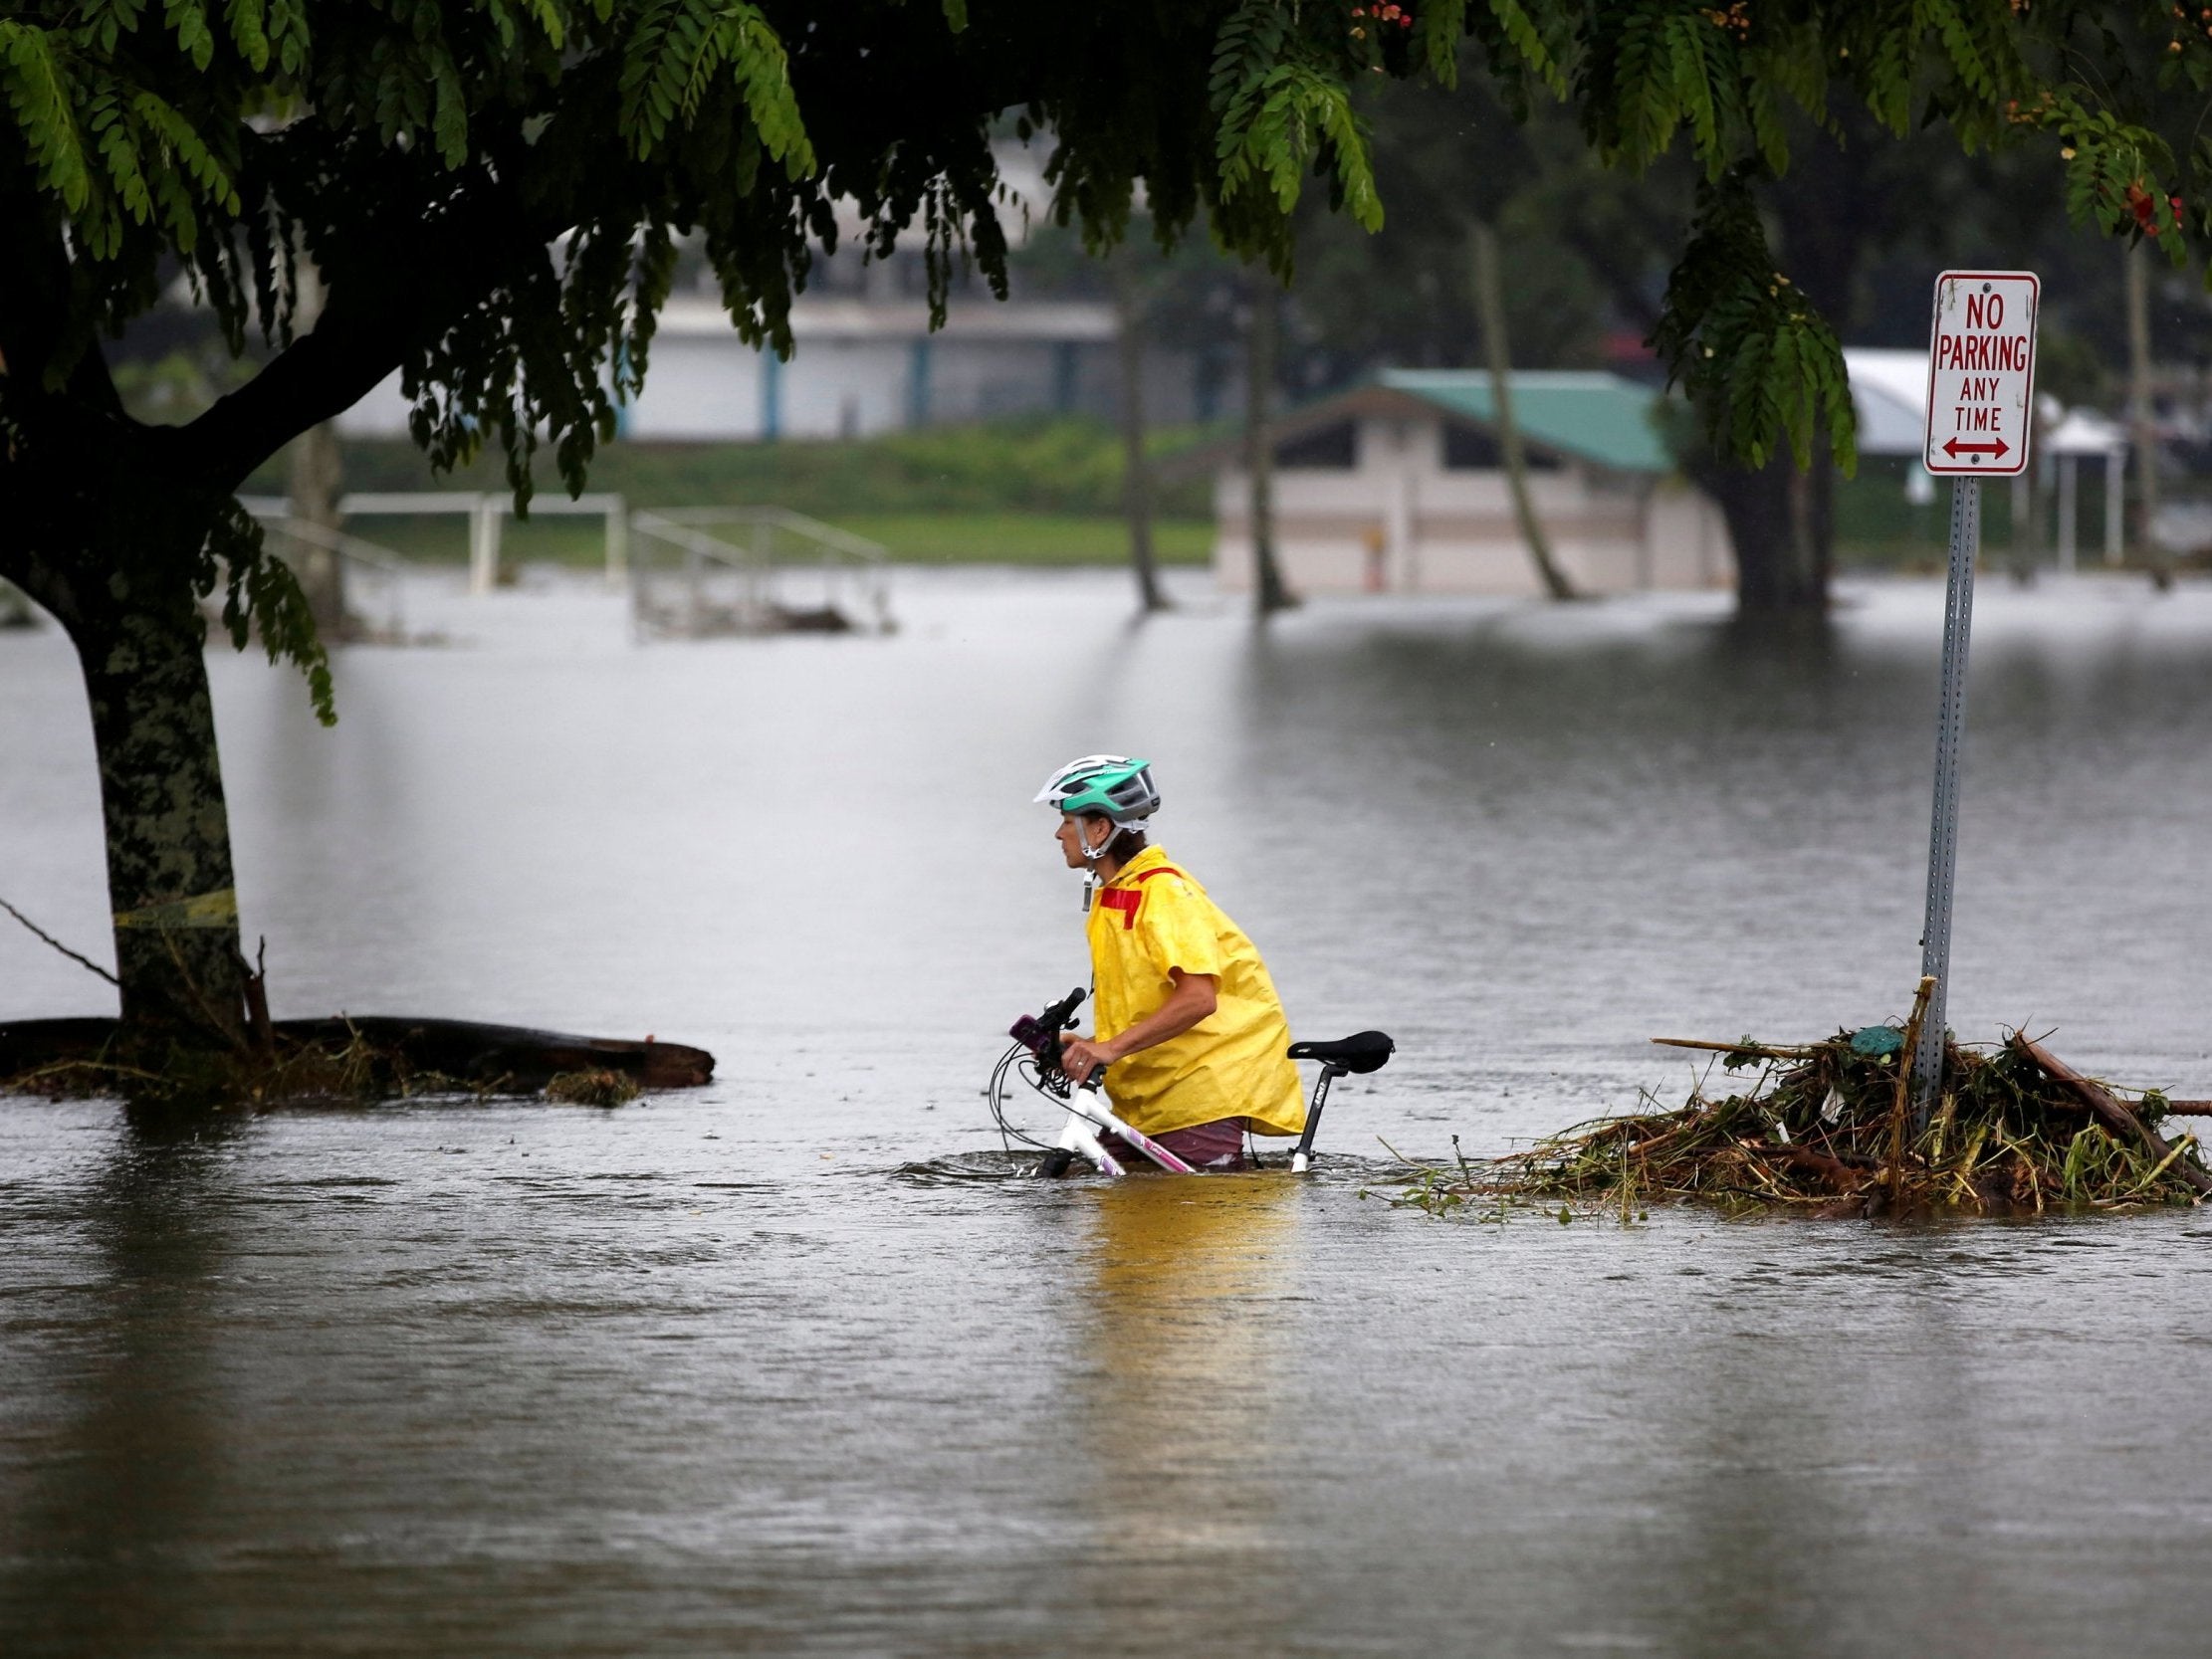 A woman pushes her bike through flooding caused by tropical storm Lane in Hilo, on Hawaii's Big Island